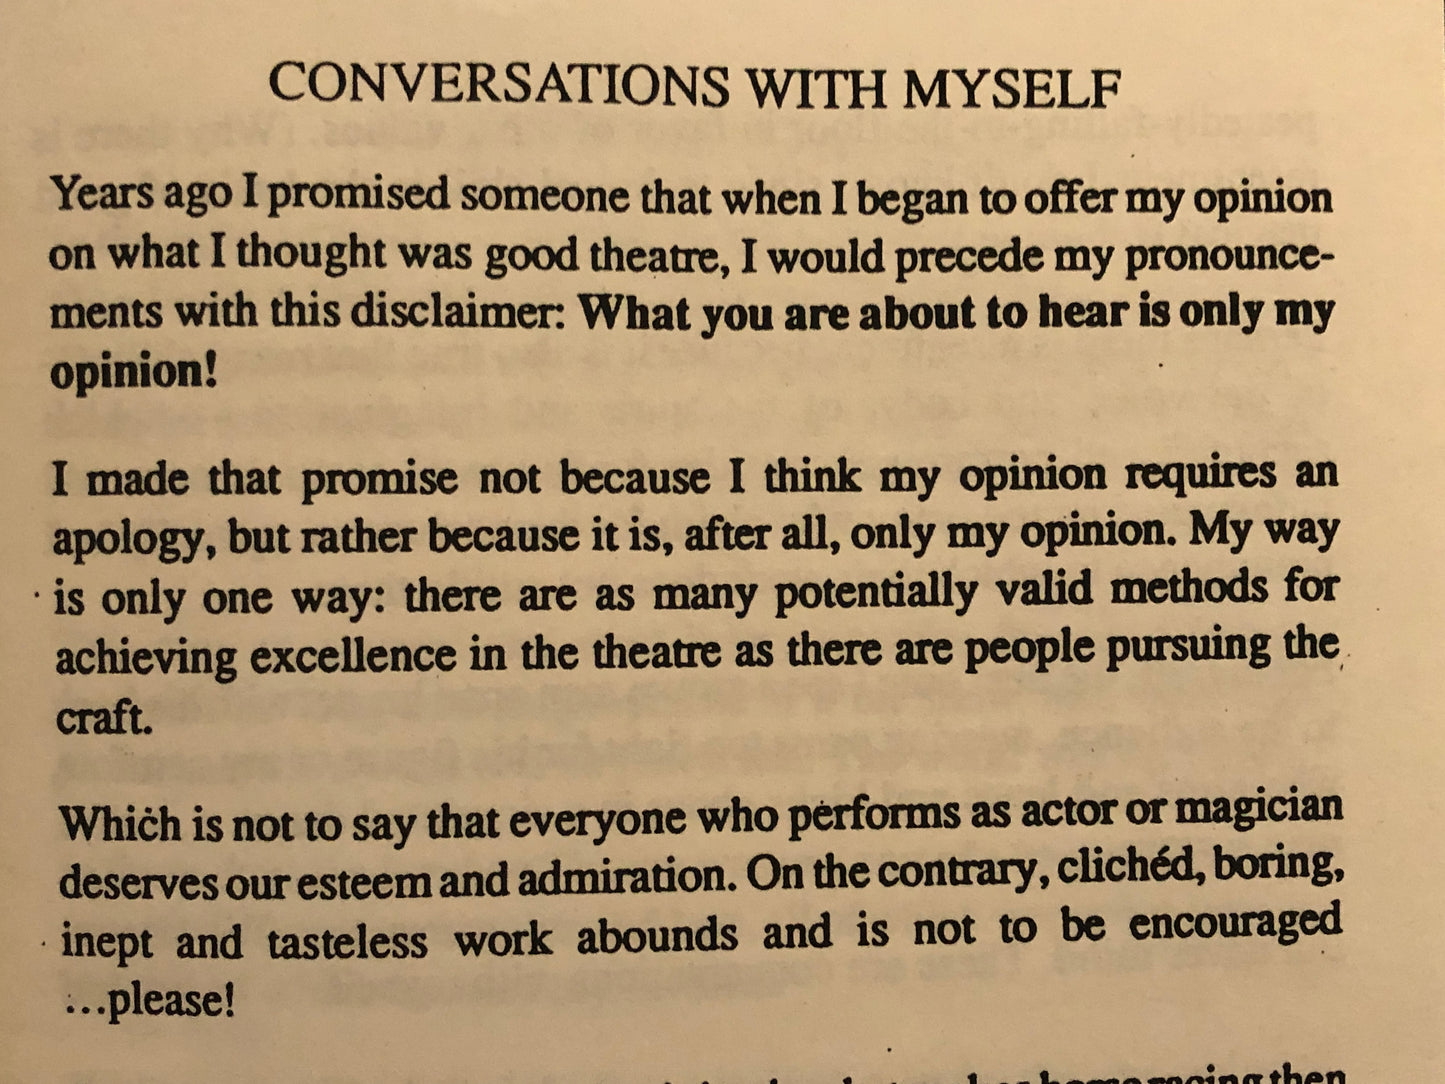 Conversations With Myself - Max Howard